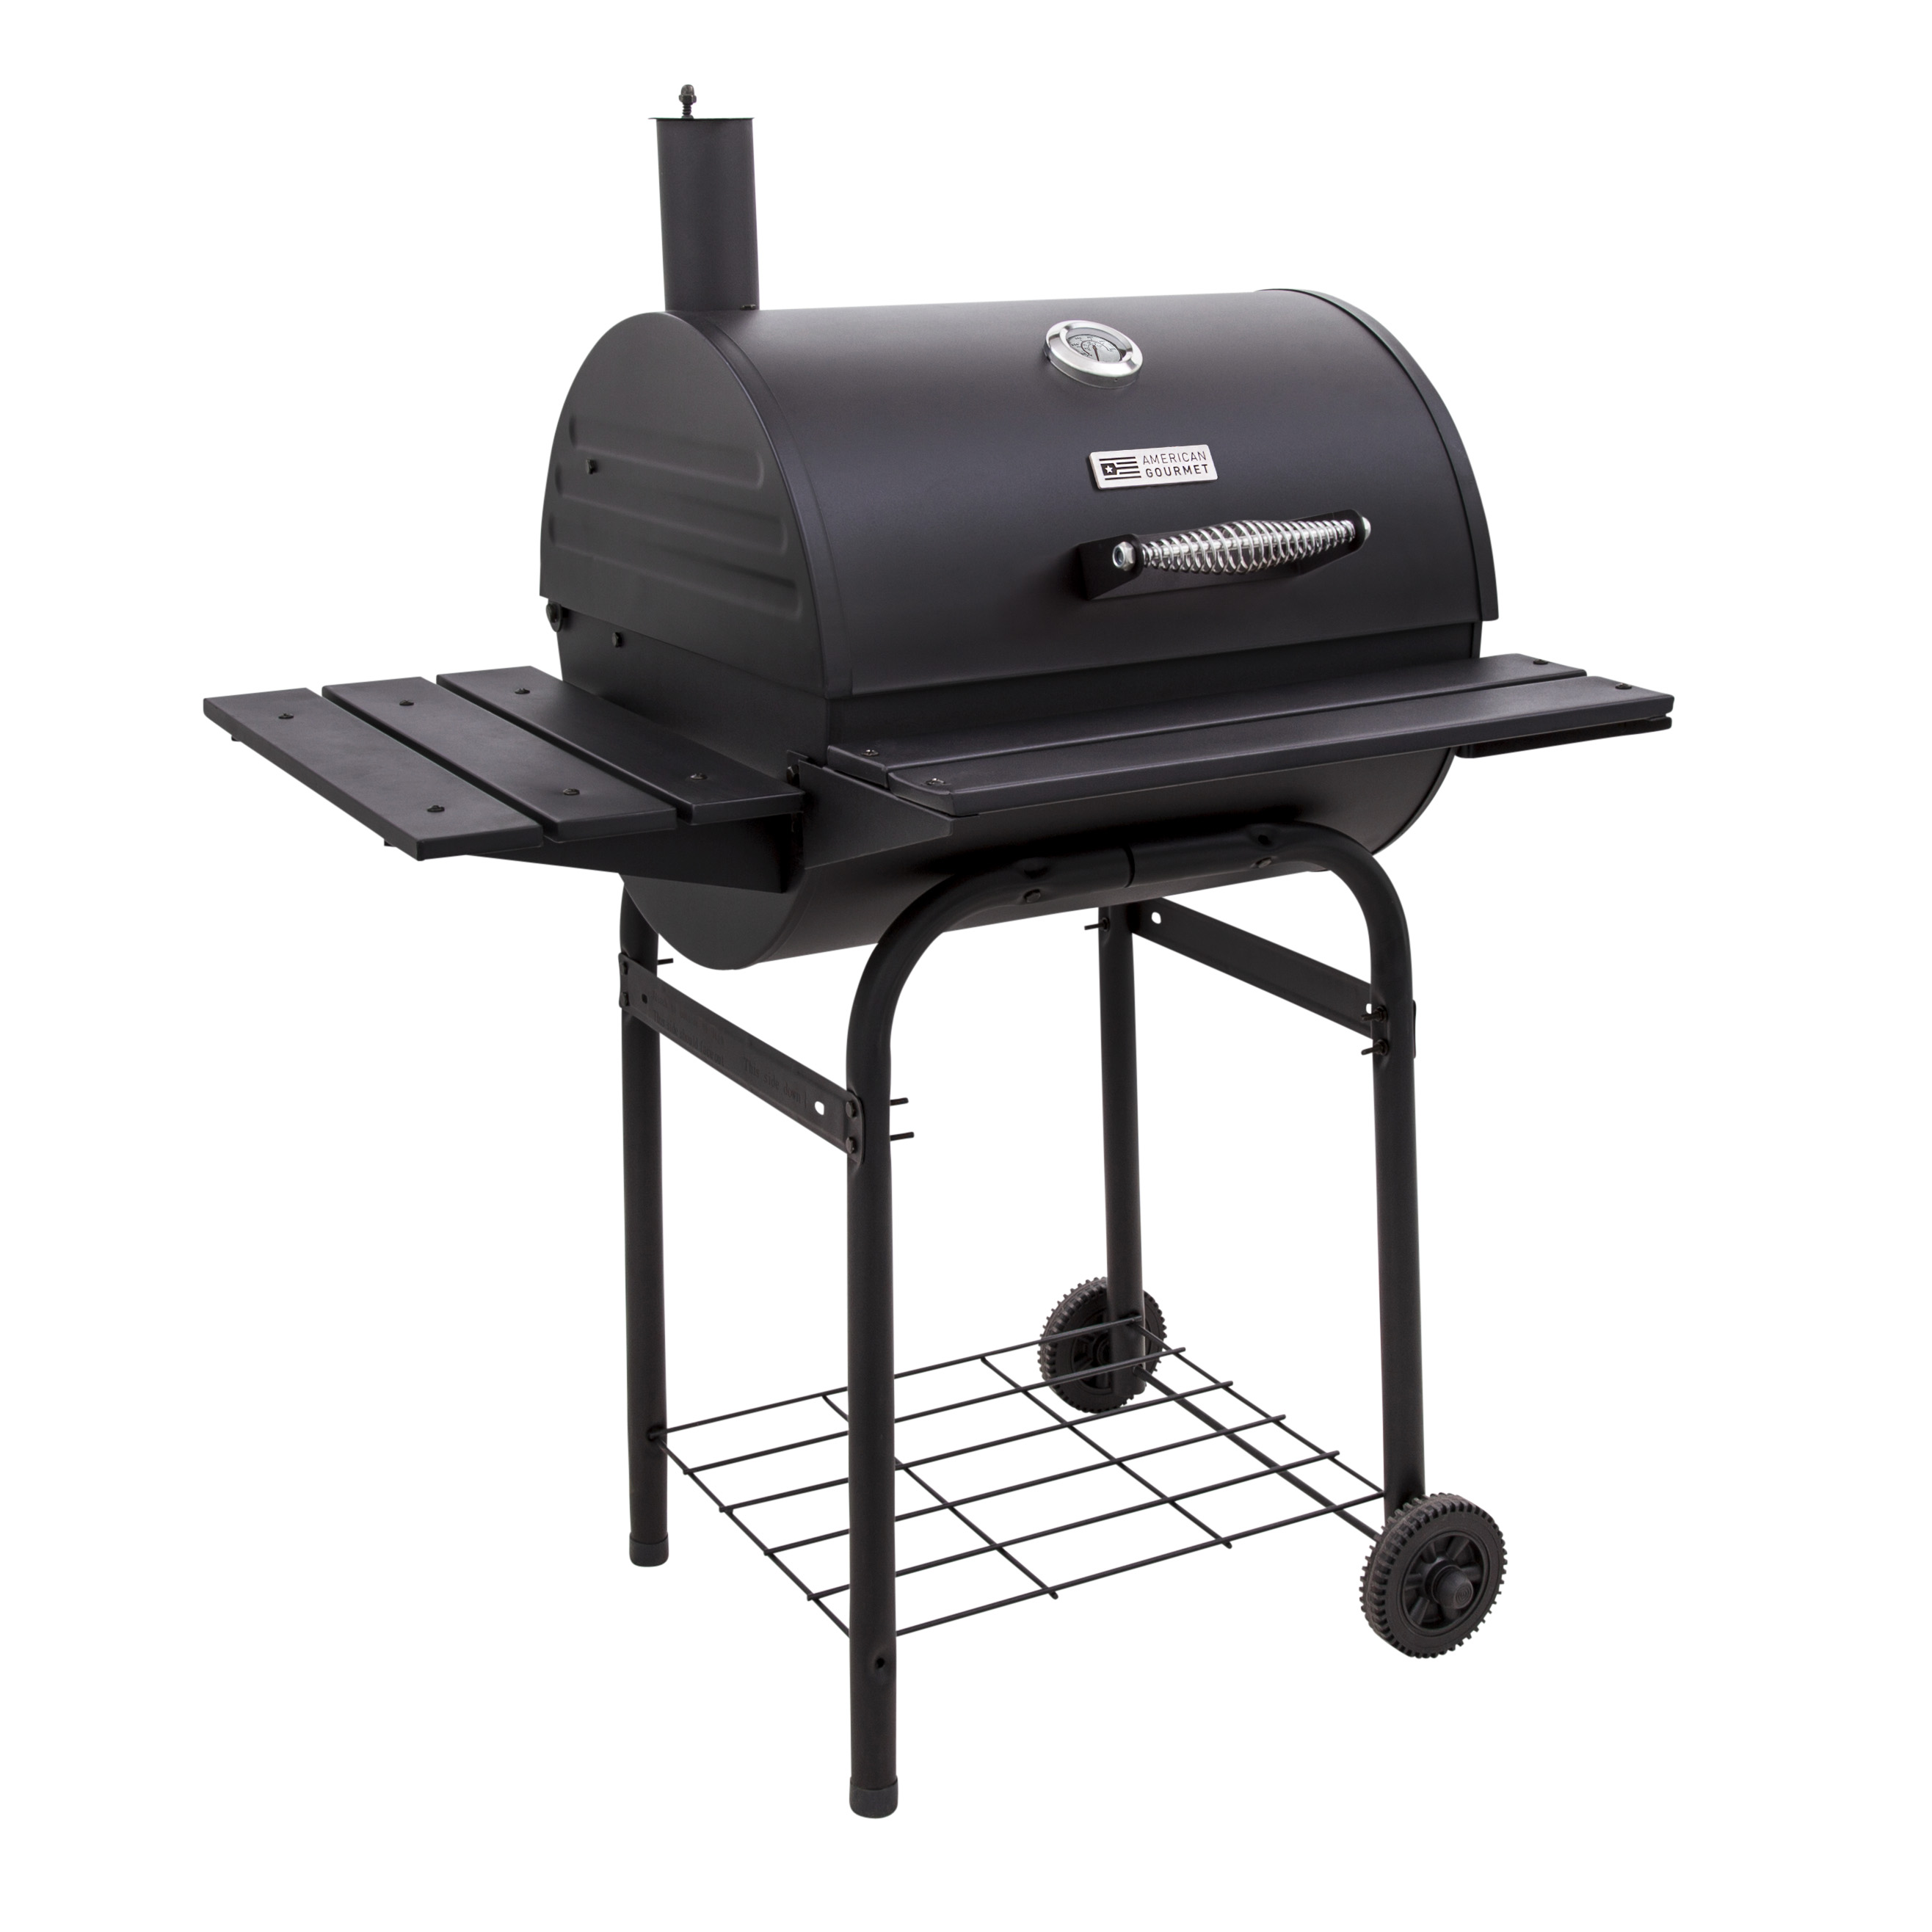 American Gourmet by Char-Broil 625 sq in Charcoal Barrel Outdoor Grill - image 2 of 6